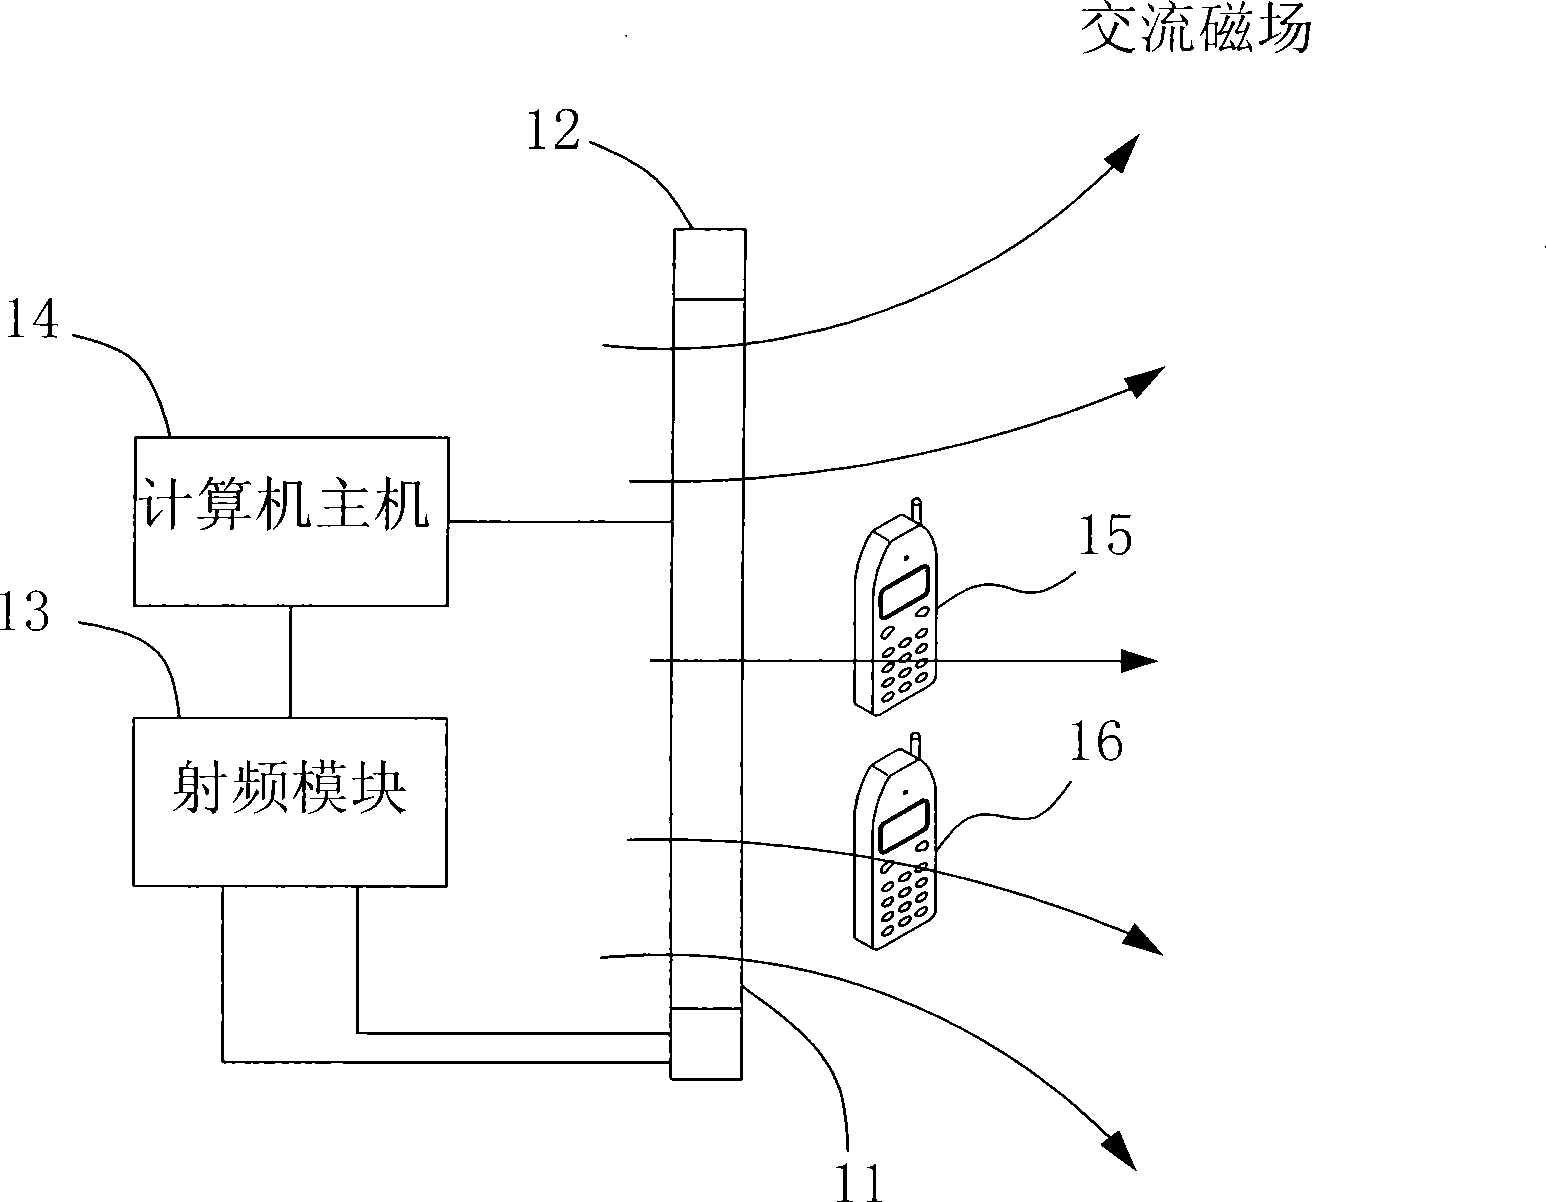 Near-field communications system and related display device thereof